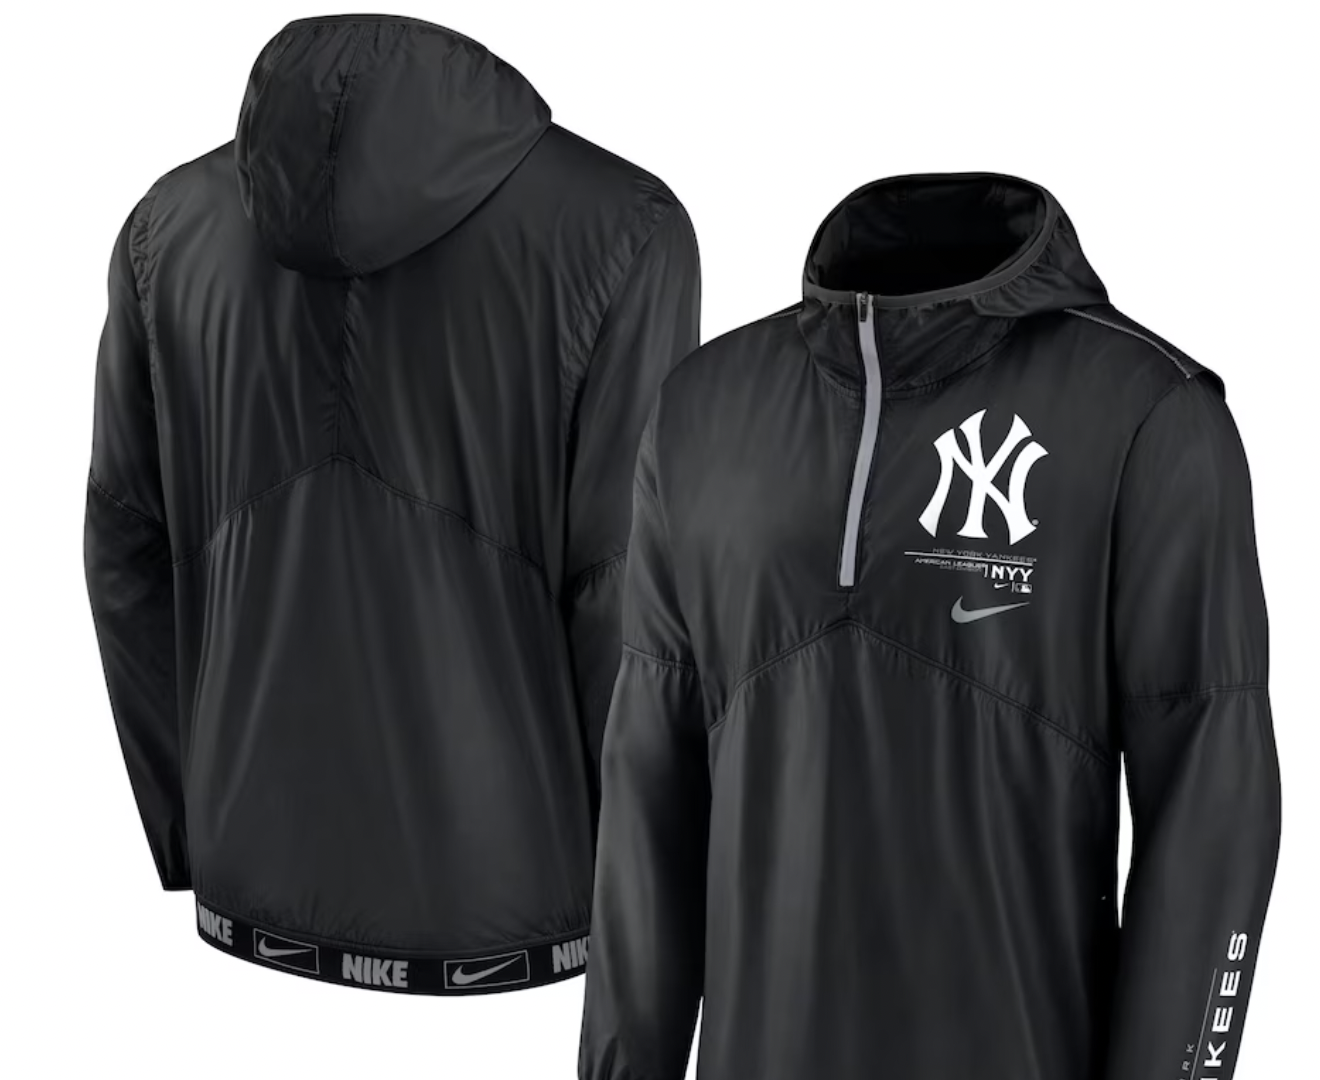 Yankees gear: How to get the latest Yankees jerseys, hats, t